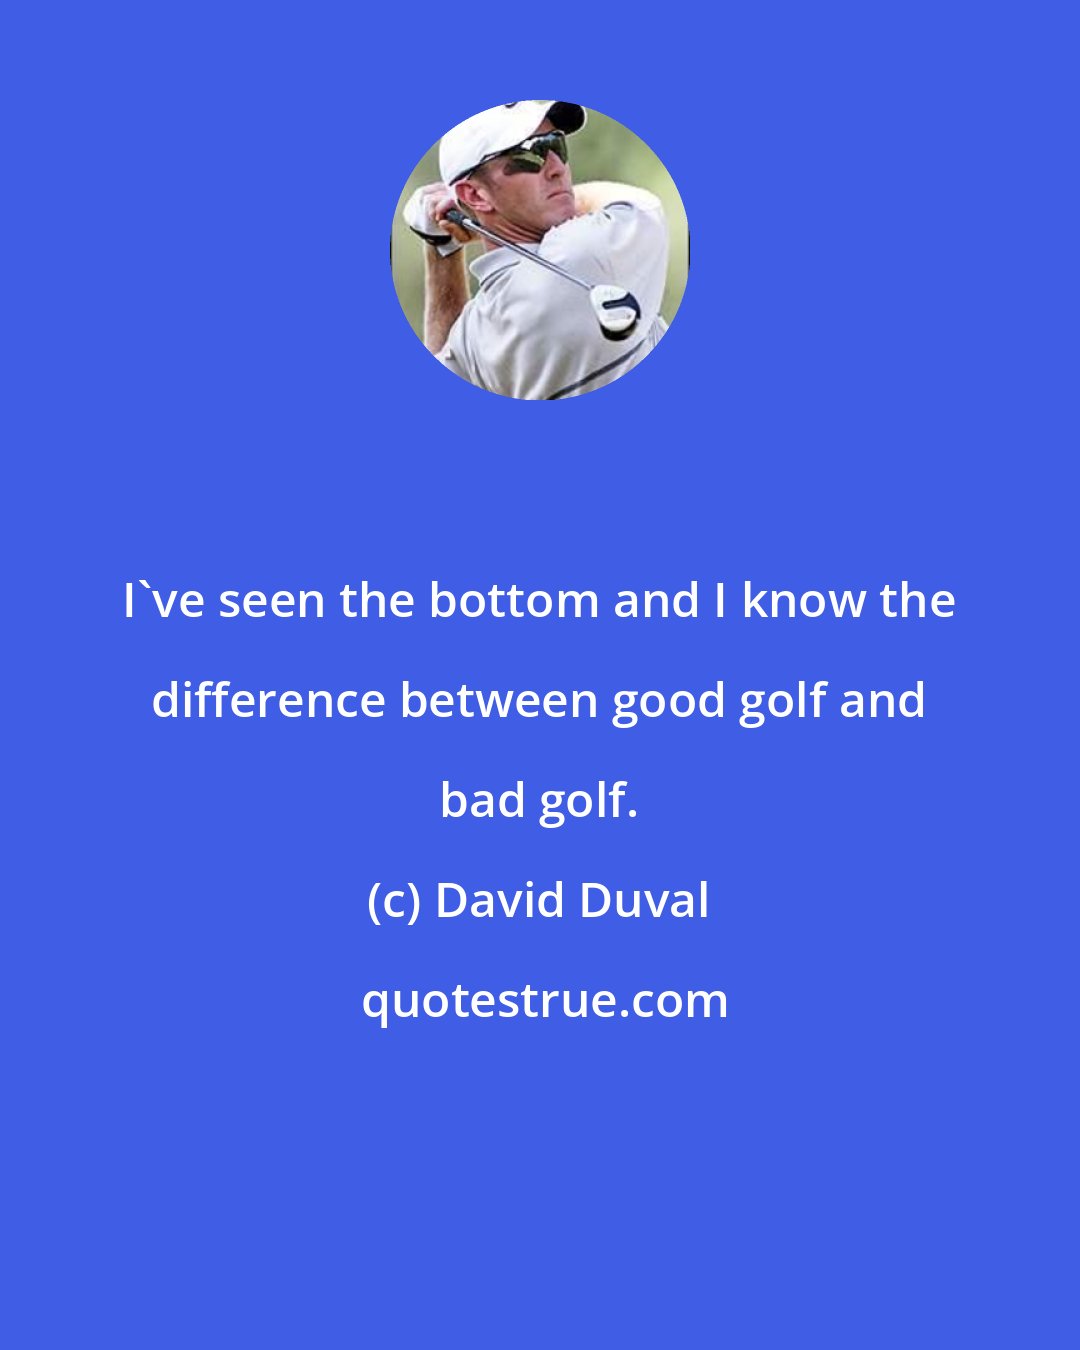 David Duval: I've seen the bottom and I know the difference between good golf and bad golf.